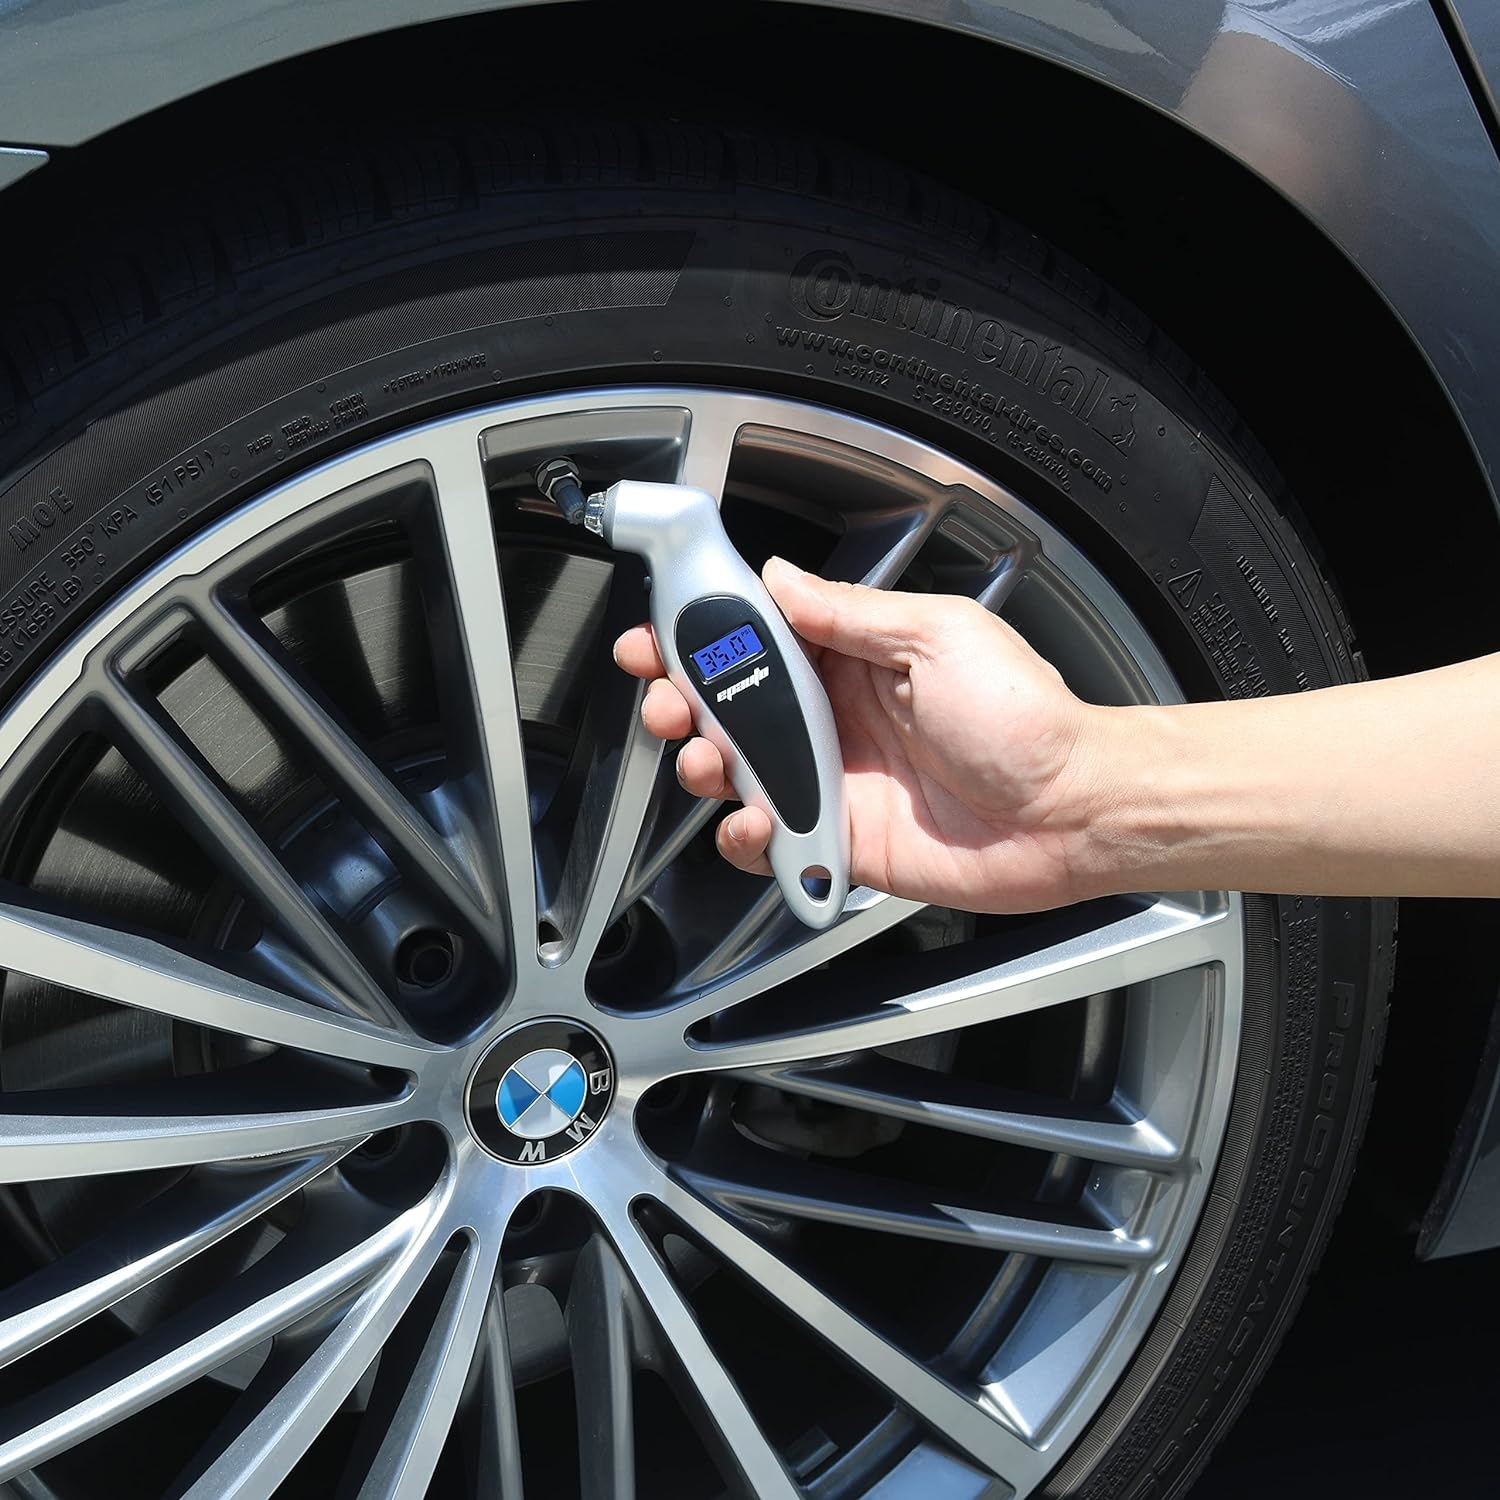 Person inflating car tire with digital tire inflator, vehicle logo visible